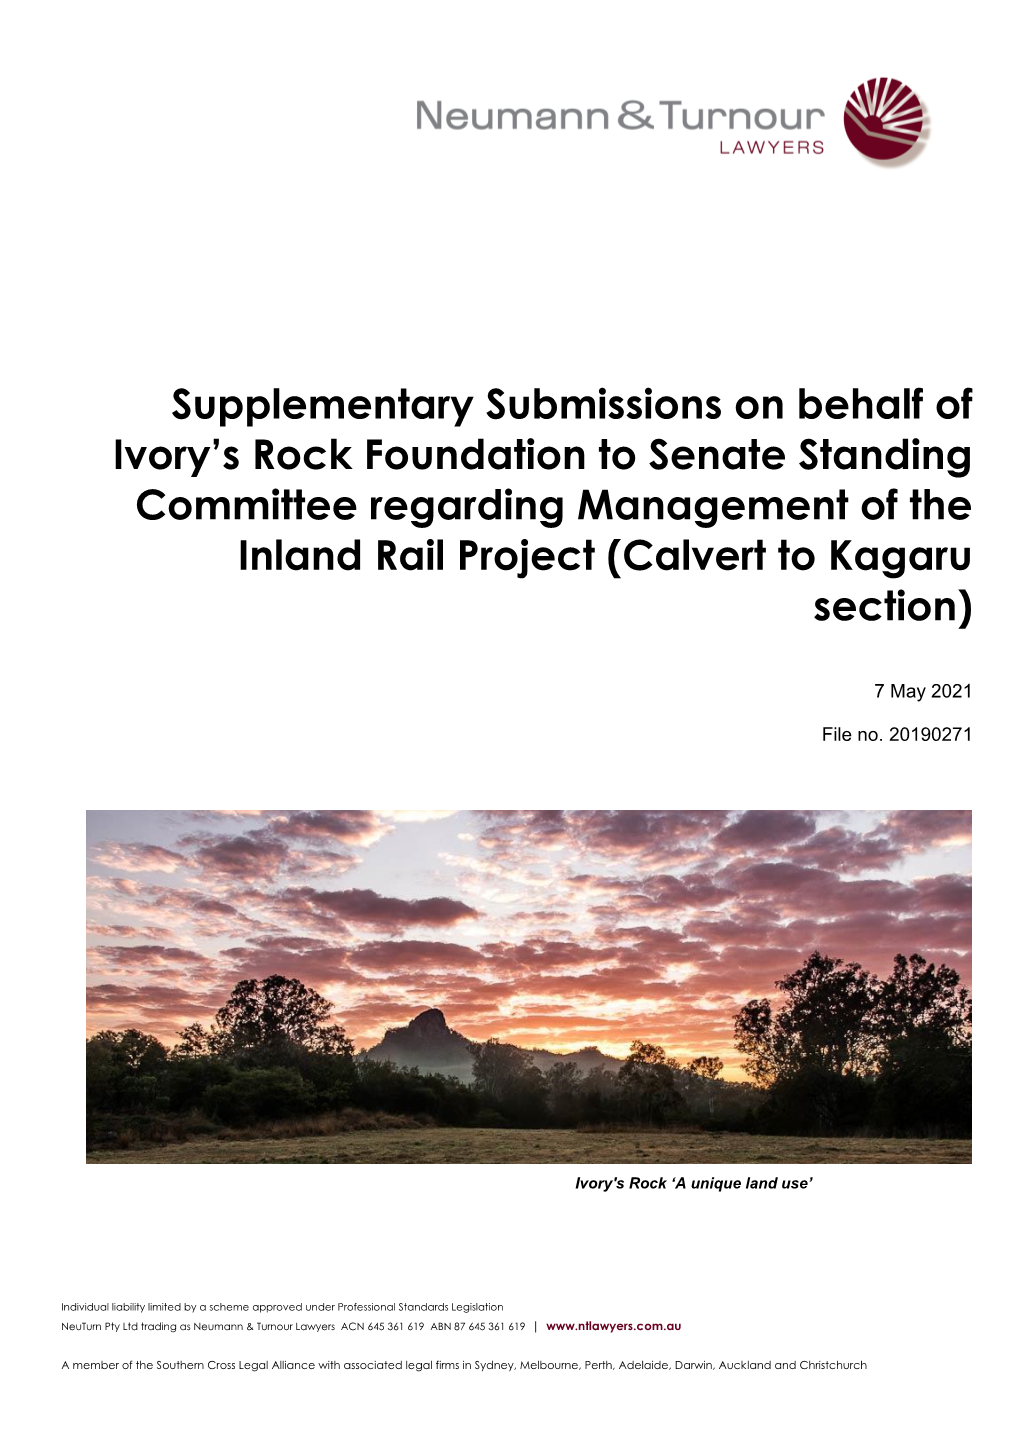 Supplementary Submissions on Behalf of Ivory's Rock Foundation To